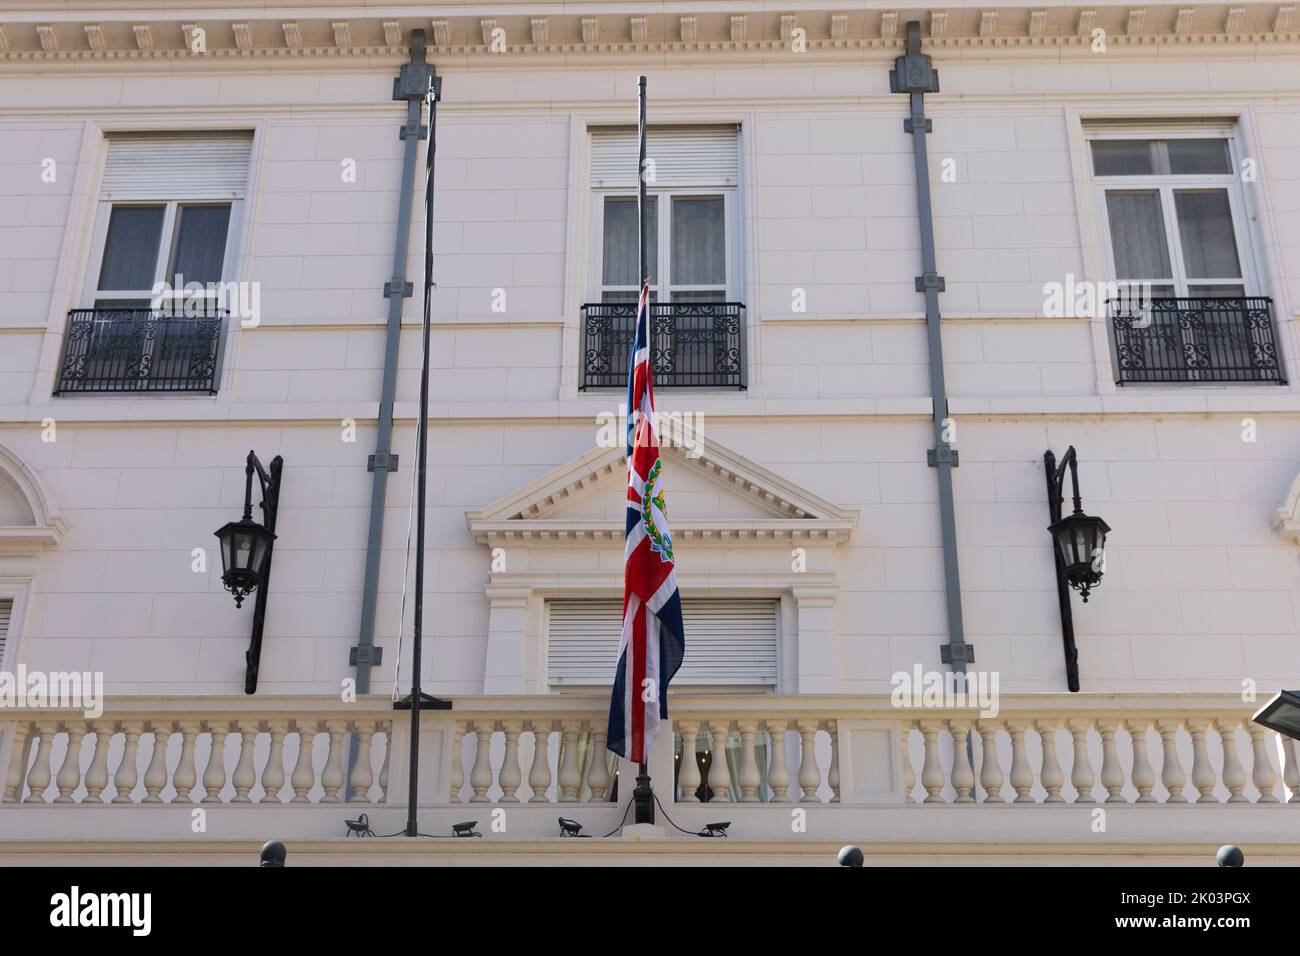 Buenos Aires, Argentina, 9th September, 2022. The house of the British Ambassador with the flag of his country at half-staff for the death of Her Majesty Queen Elizabeth II. (Credit: Esteban Osorio/Alamy Live News) Stock Photo